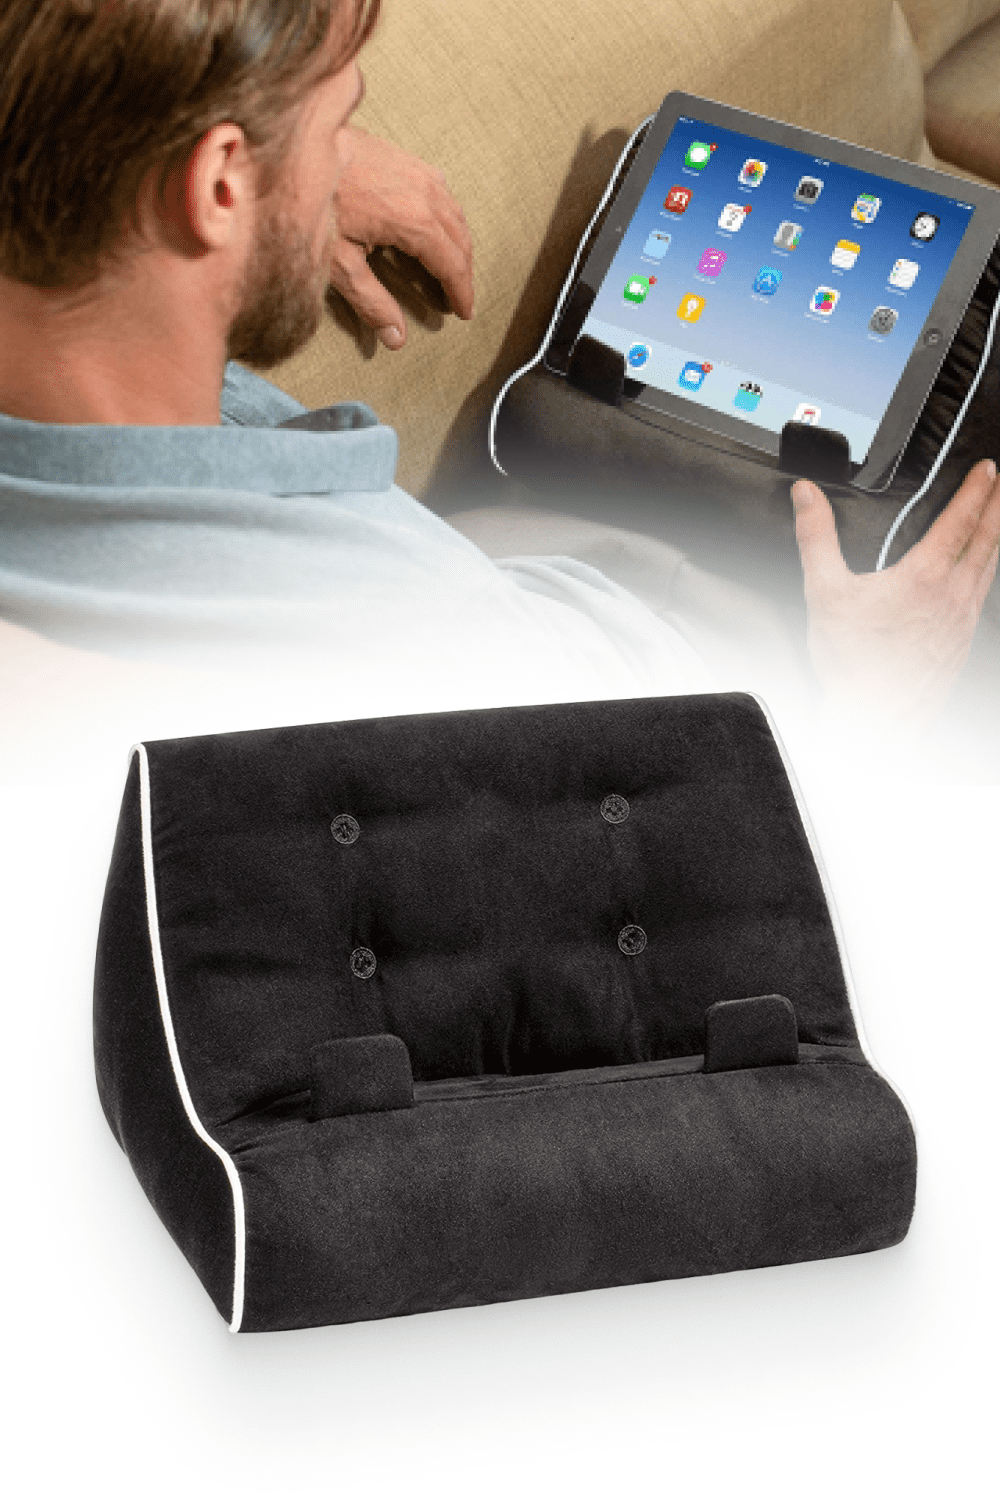 Black Book Couch for tablets.